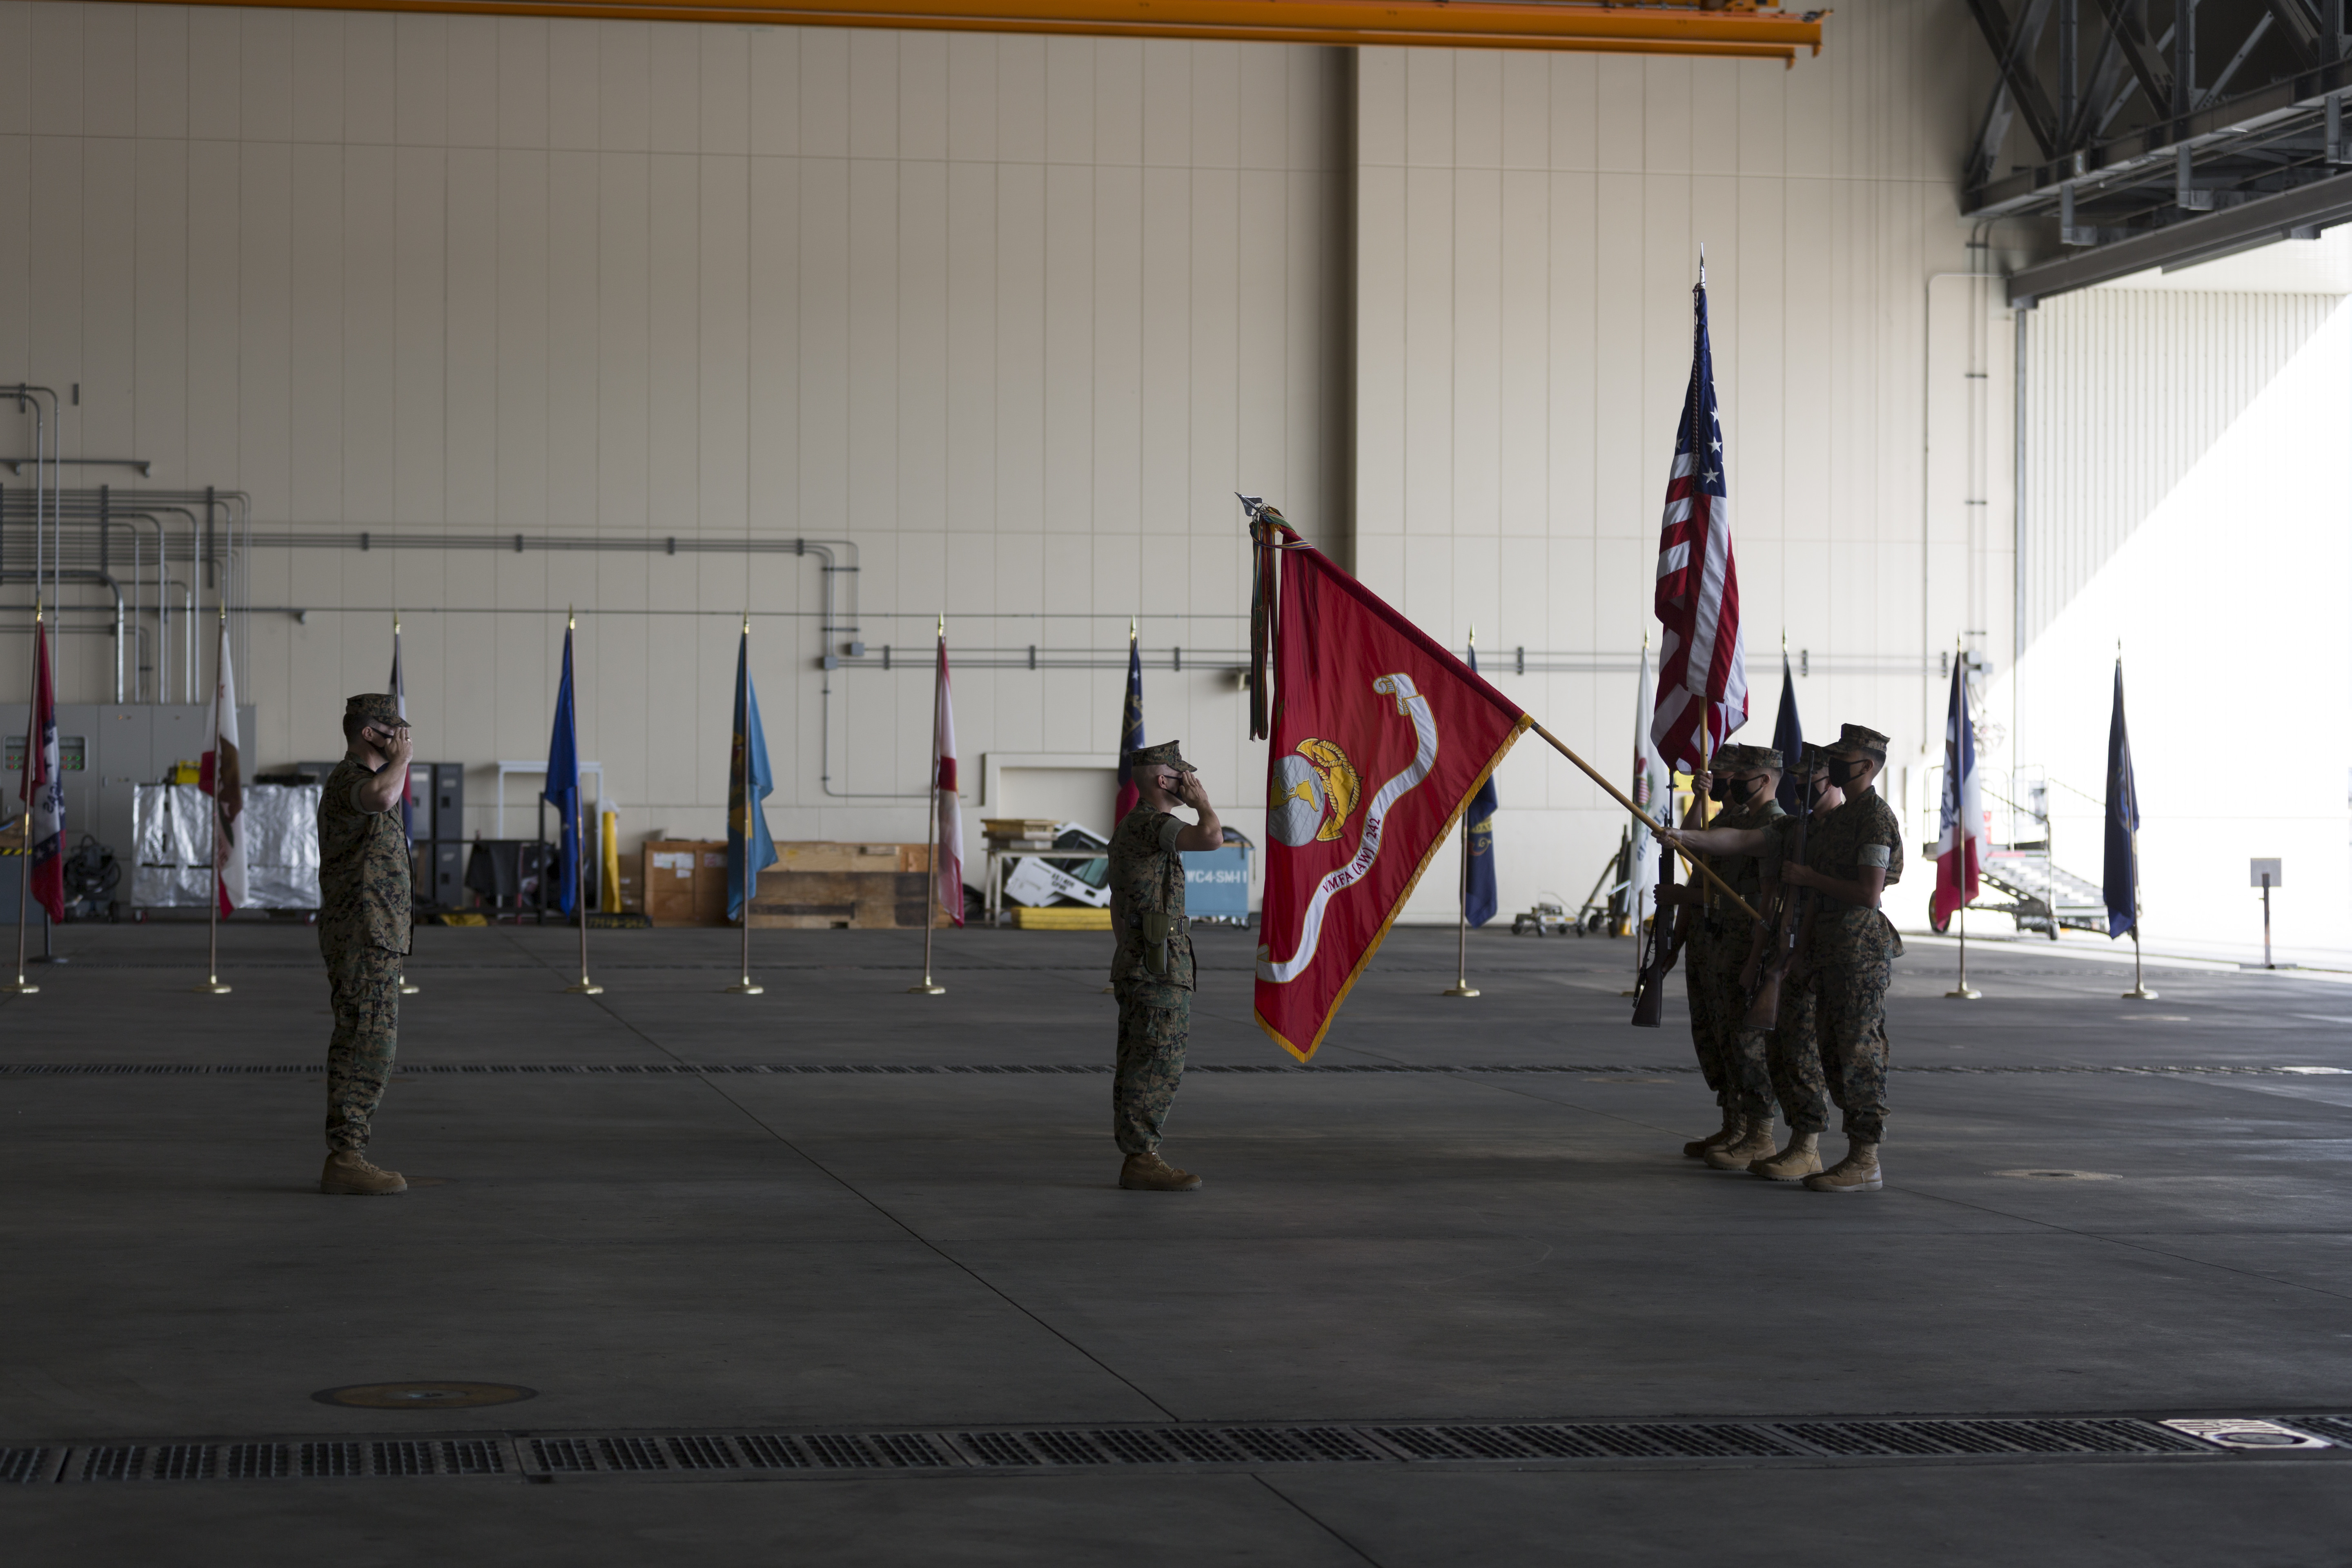 U.S. Marines with Marine All Weather Fighter Attack Squadron (VMFA(AW)) 242 present colors during the change of command and re-designation of VMFA(AW)-242 at Marine Corps Air Station Iwakuni, Japan, Oct. 16, 2020. U.S. Marine Corps Lt. Col. Andrew Kelemen, outgoing commanding officer of VMFA(AW)-242, relinquished command to Lt. Col. Michael Wyrsch during the re-designation and change of command of VMFA(AW)-242 to Marine Fighter Attack Squadron (VMFA) 242. VMFA-242's transition to the F-35B Lightning II brings advanced avionics capabilities to joint, allied, and partner forces in support of the U.S.-Japan Alliance and a free and open Indo-Pacific. (U.S. Marine Corps photo by Lance Cpl. Tyler Harmon)